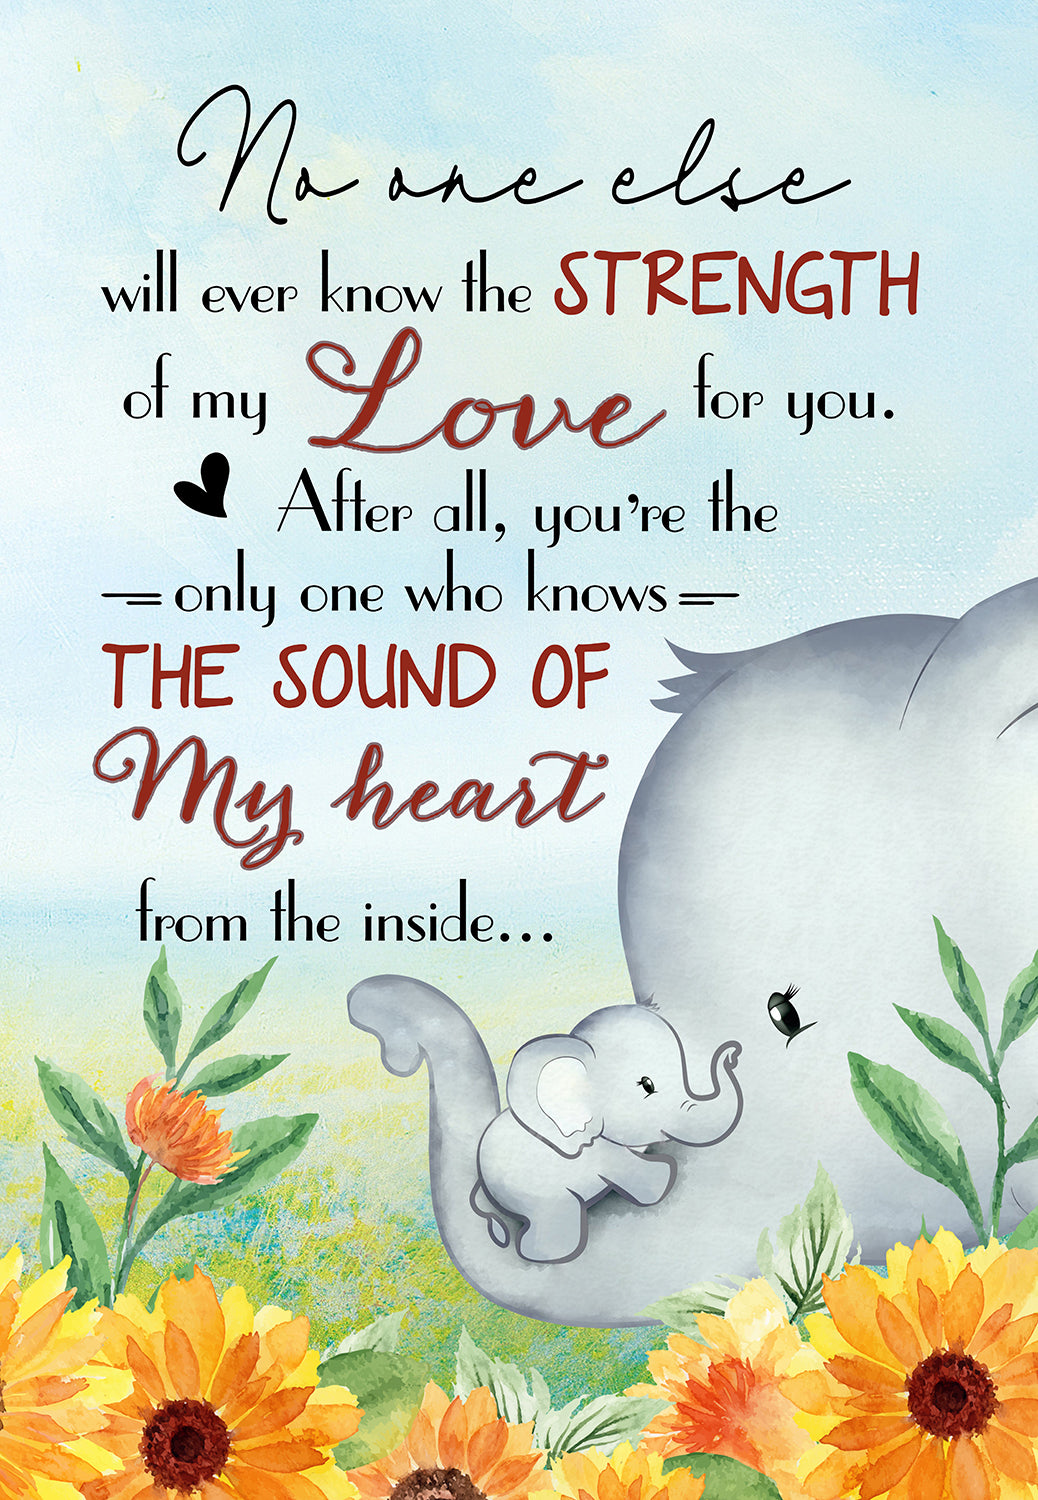 Poster Elephants, No One Else Will Ever Know The Strength of My Love for You-HH0308